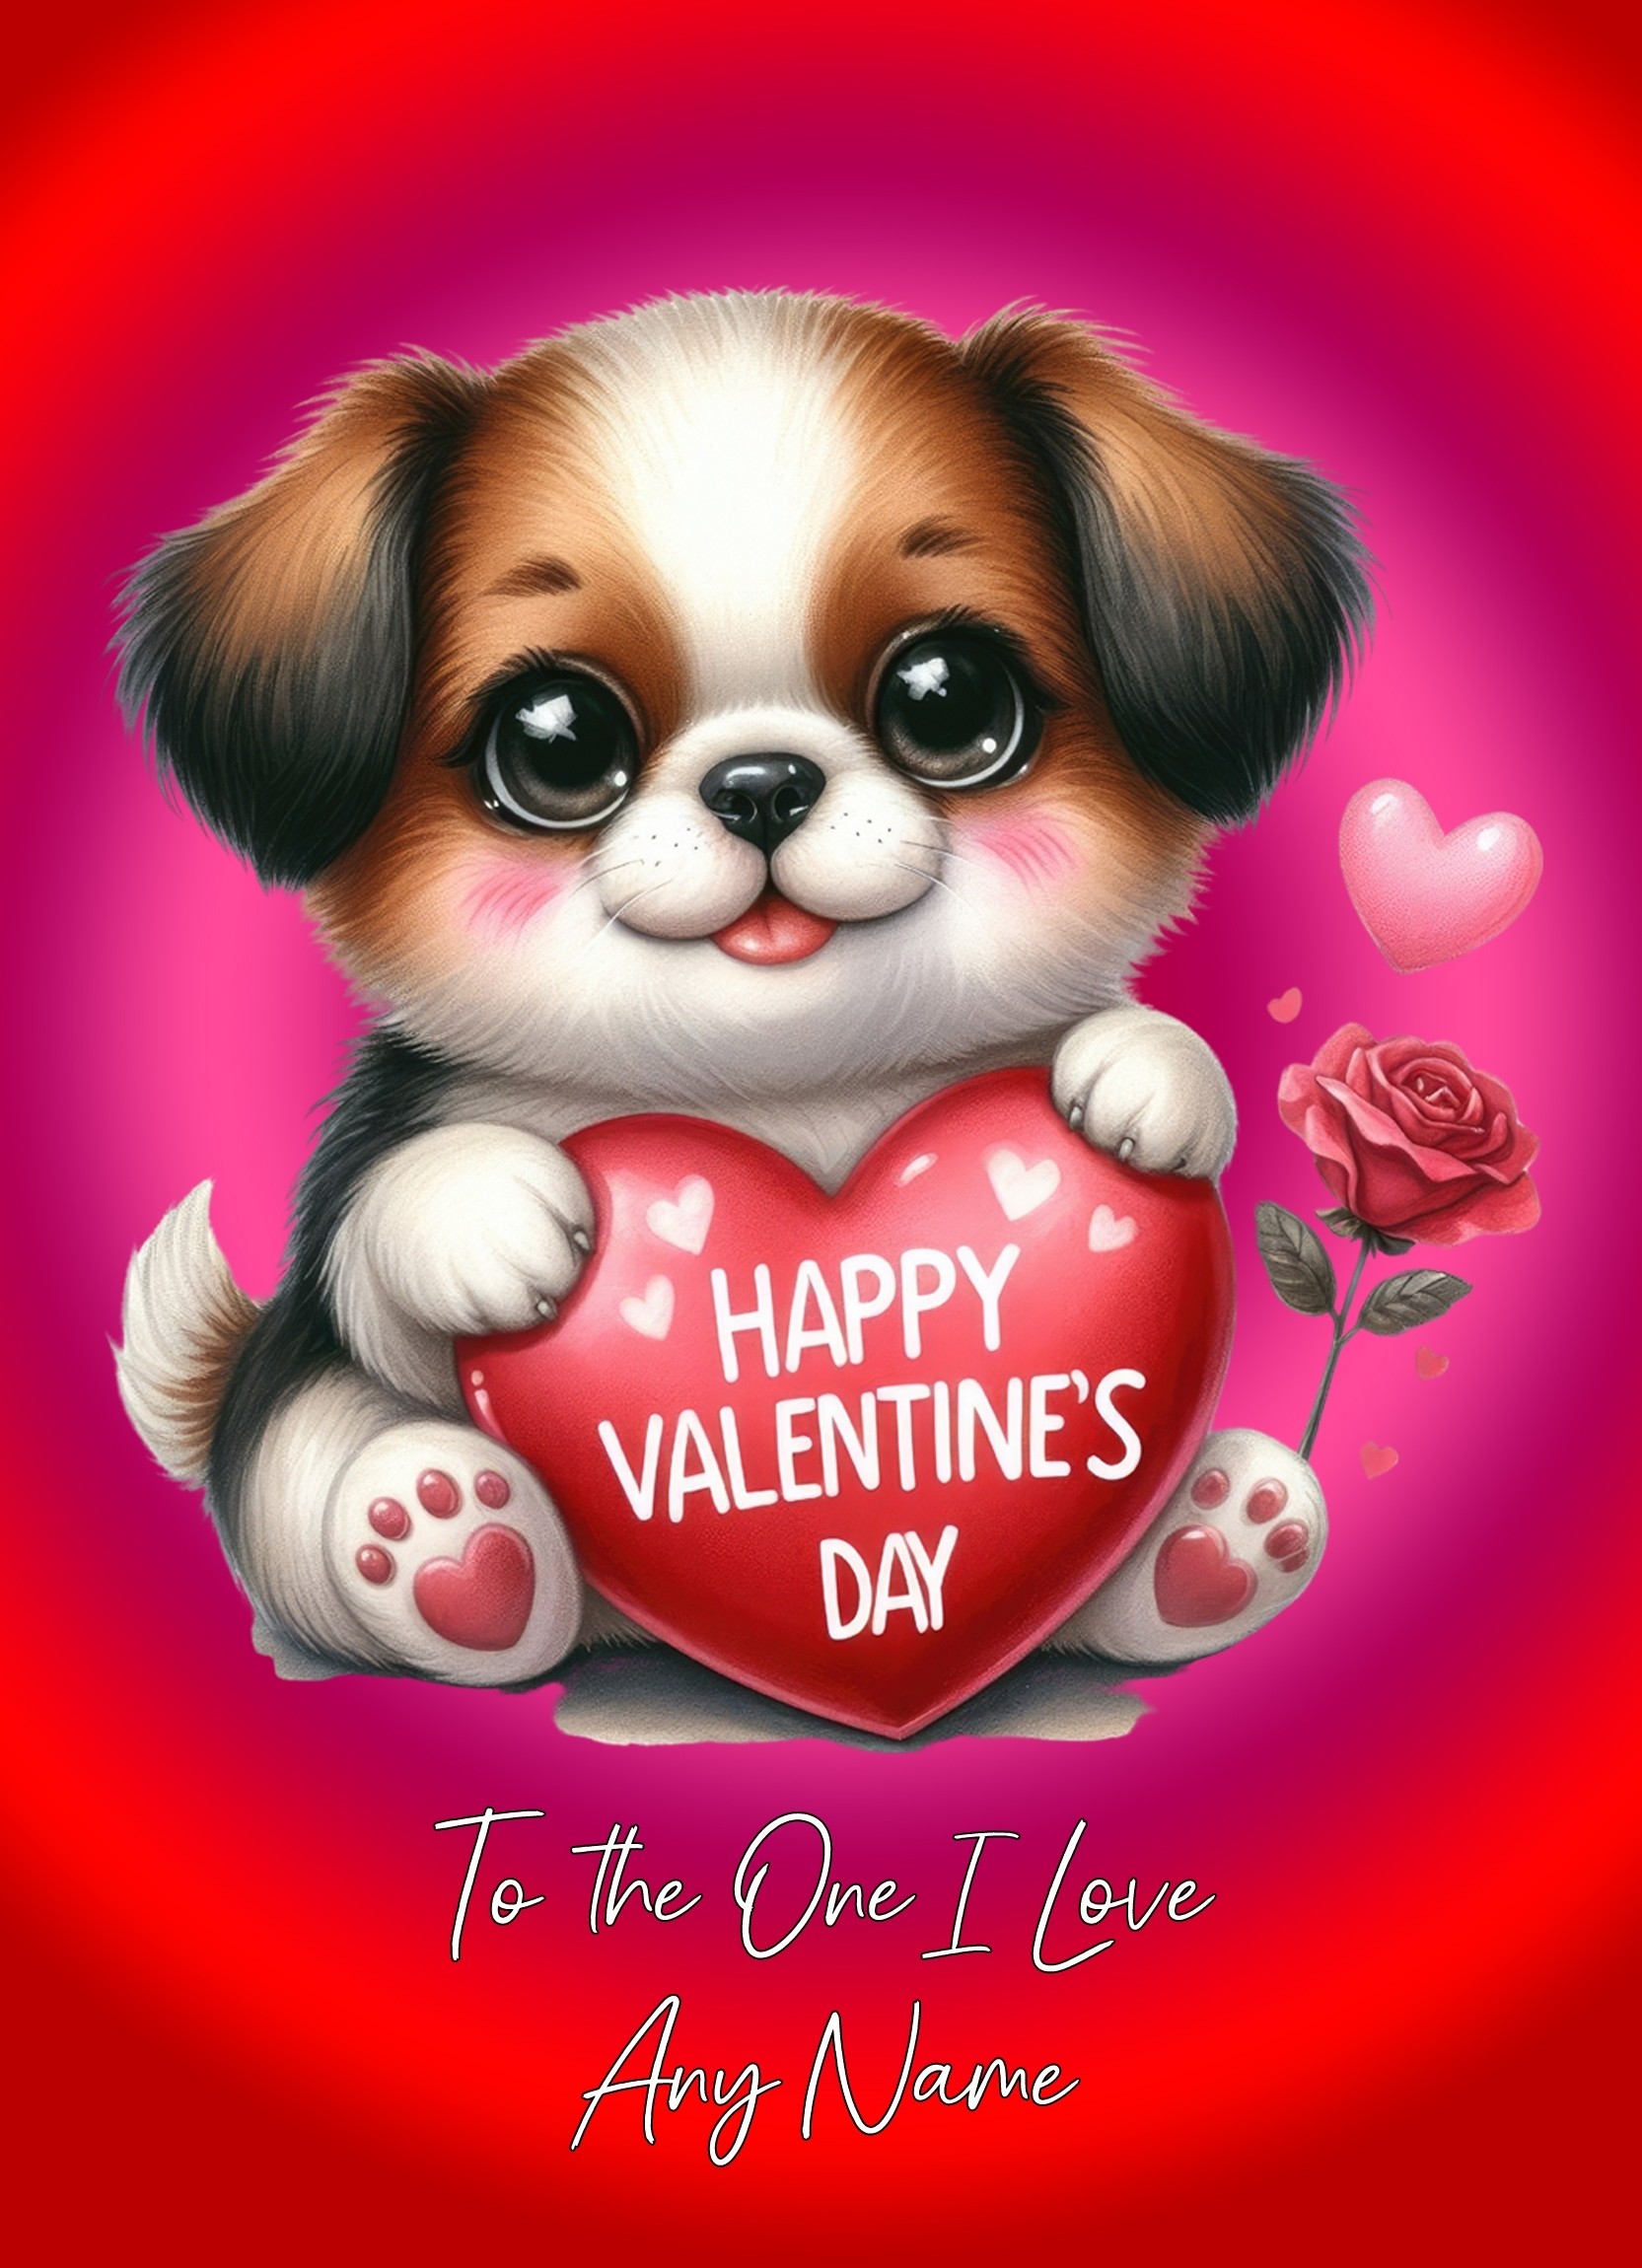 Personalised Valentines Day Card for One I Love (Dog)